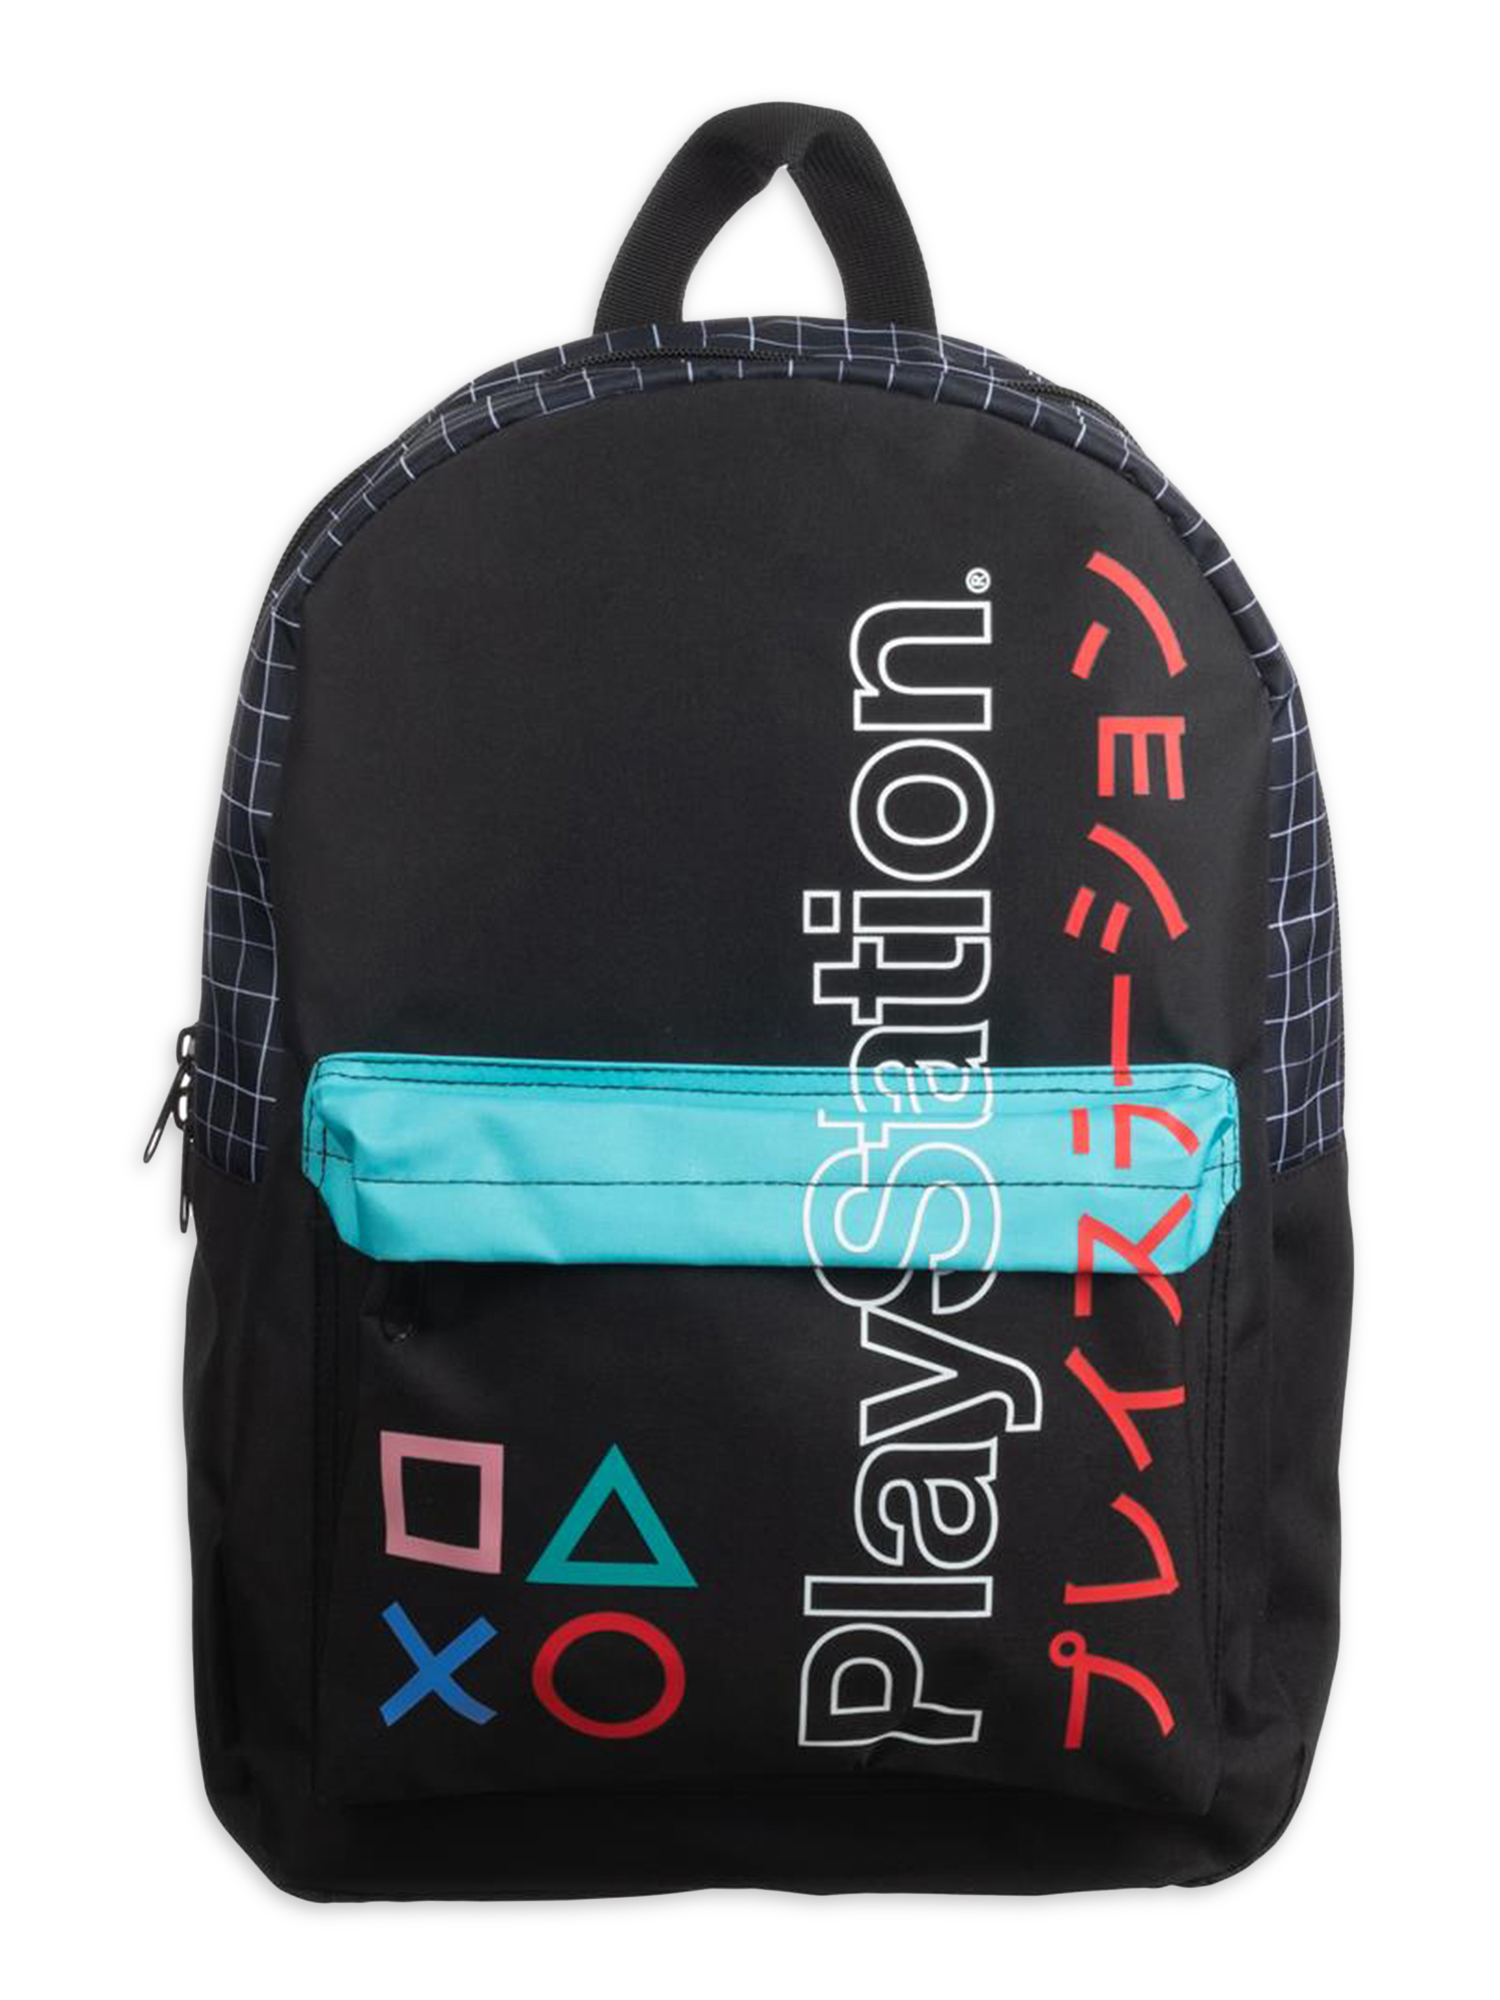 Sony PlayStation 16.5" Black Laptop Backpack with Adjustable Straps - image 1 of 2